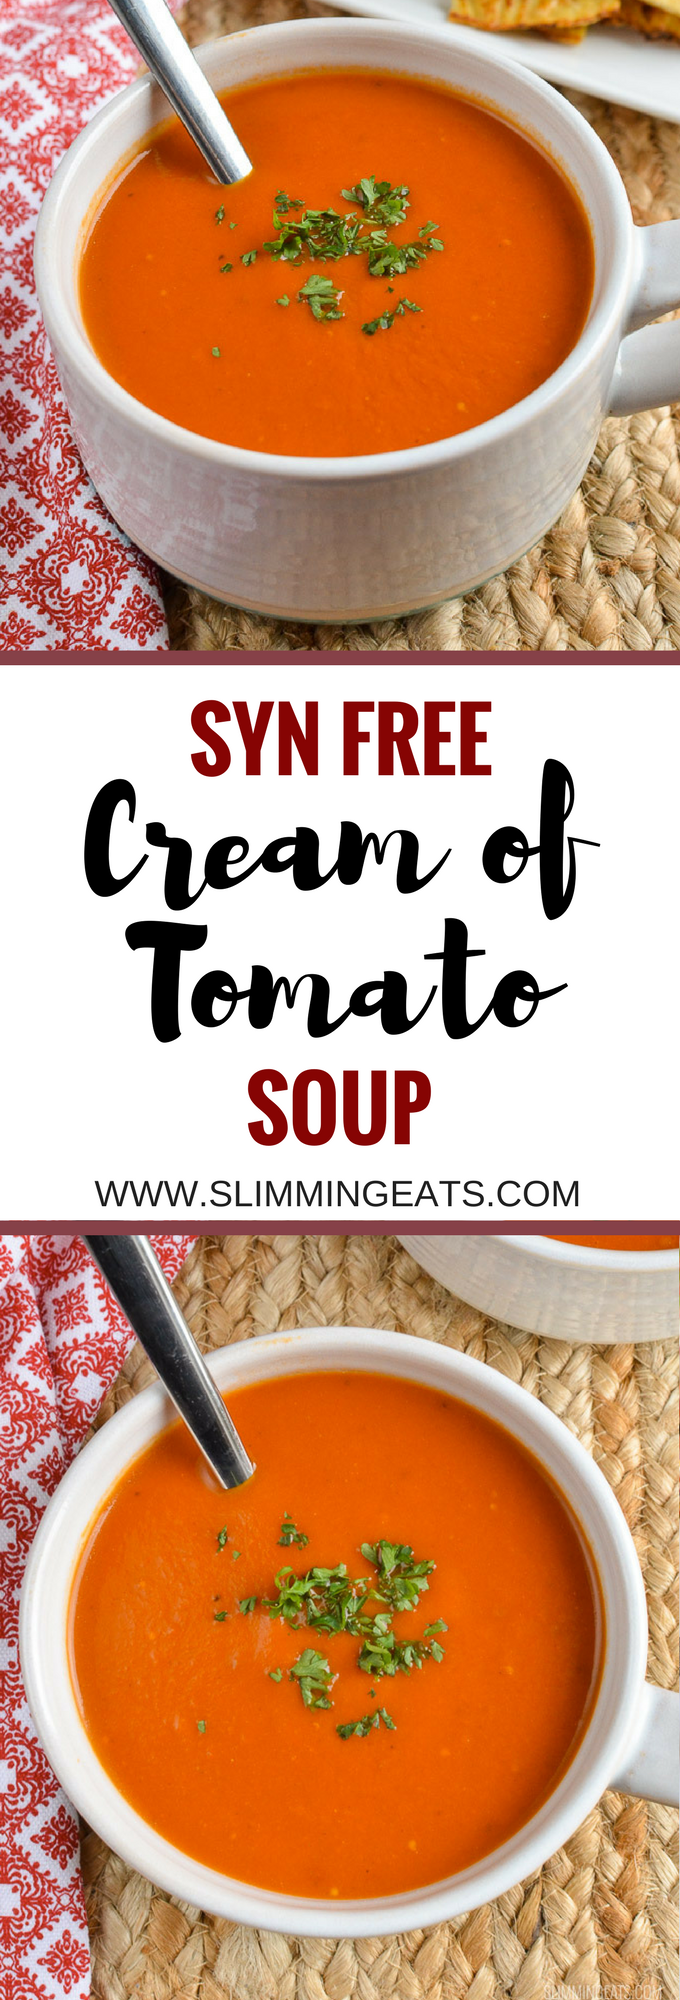 Slimming Eats - Syn Free Cream of Tomato Soup - gluten free, vegetarian, Slimming World and Weight Watchers friendly